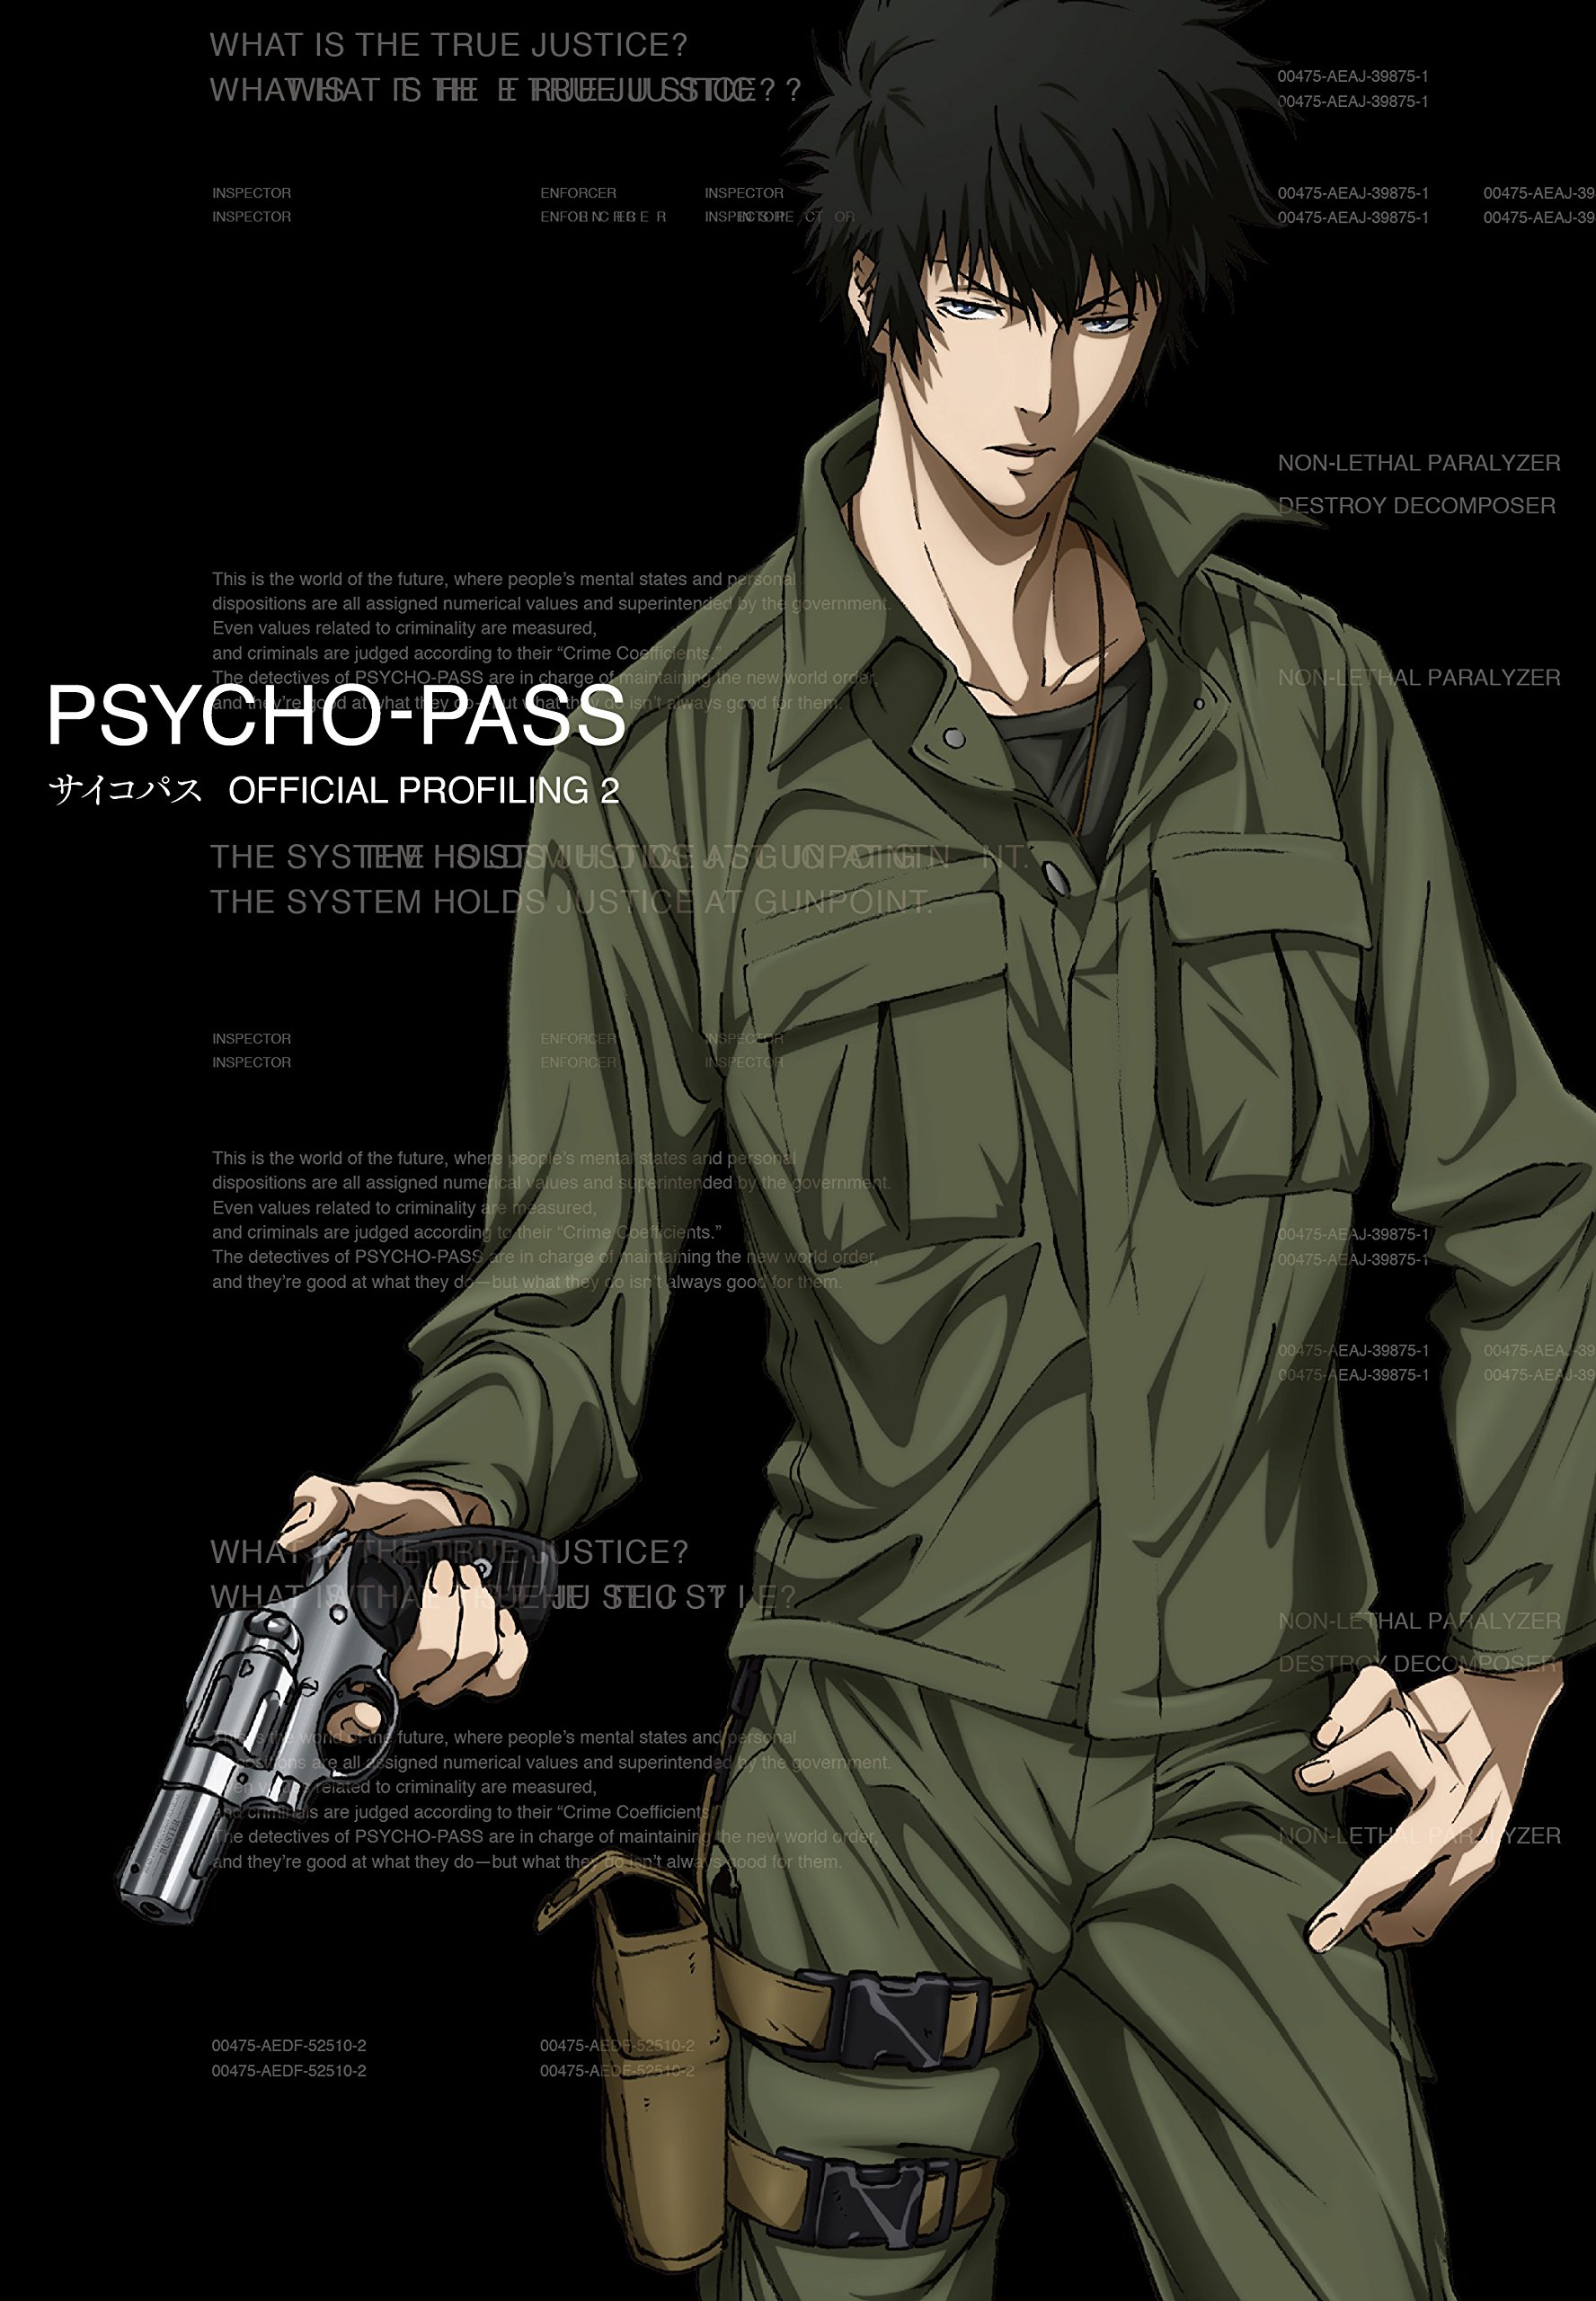 The Official Profiling Book 2 | Psycho-Pass Wiki | Fandom